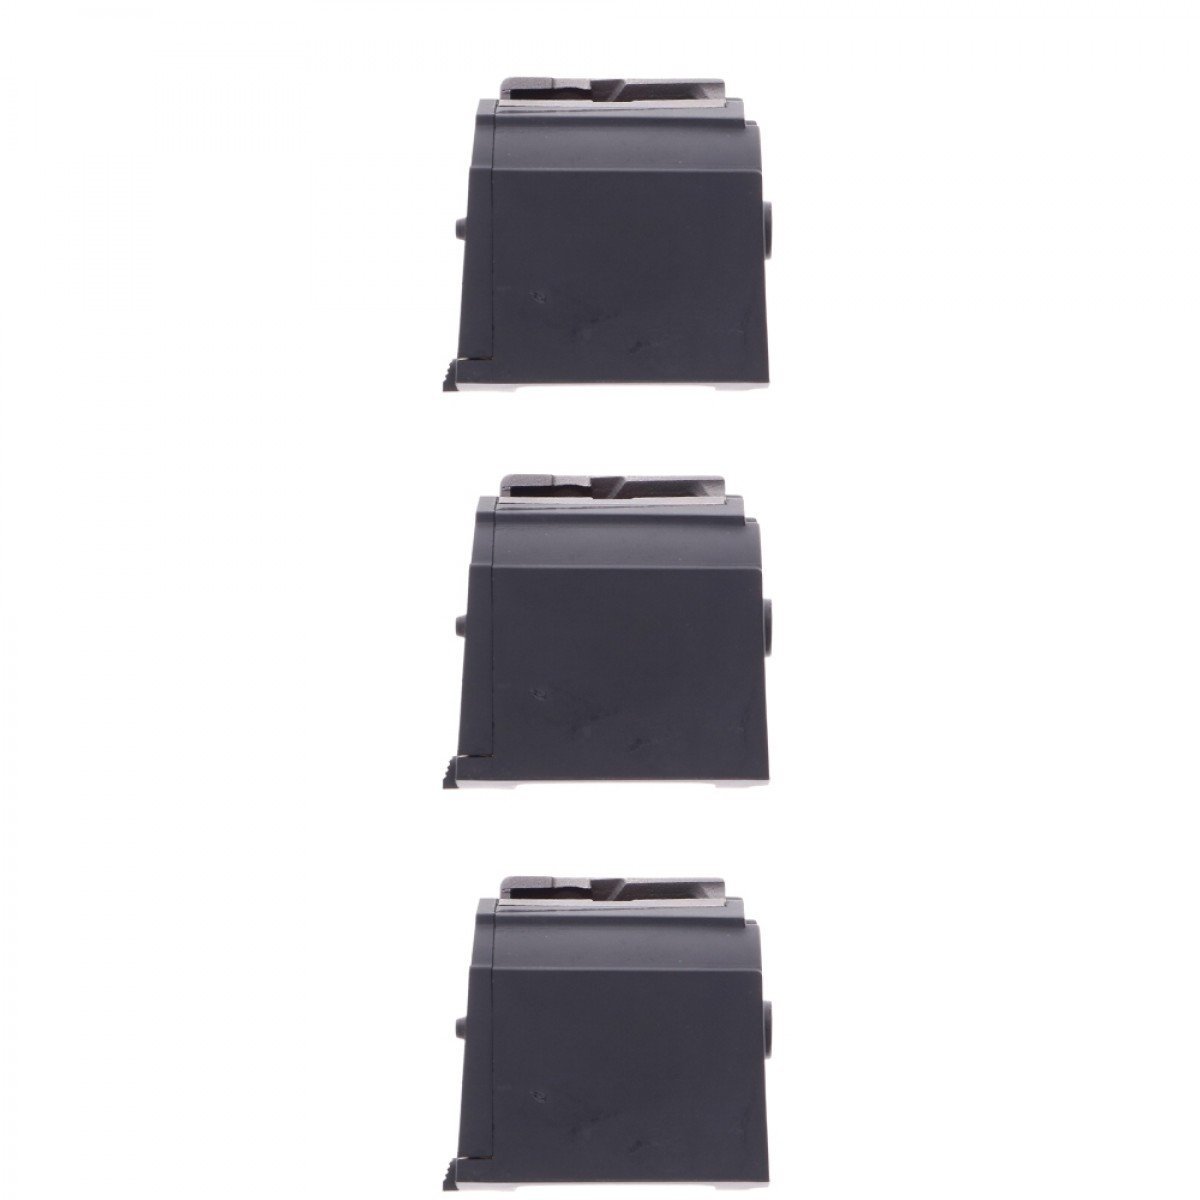 5 Pack Fits Ruger 10/22 Magazines 22 LR BX-1 10 RD Clips 90451 W/ CAPS & Goodie 